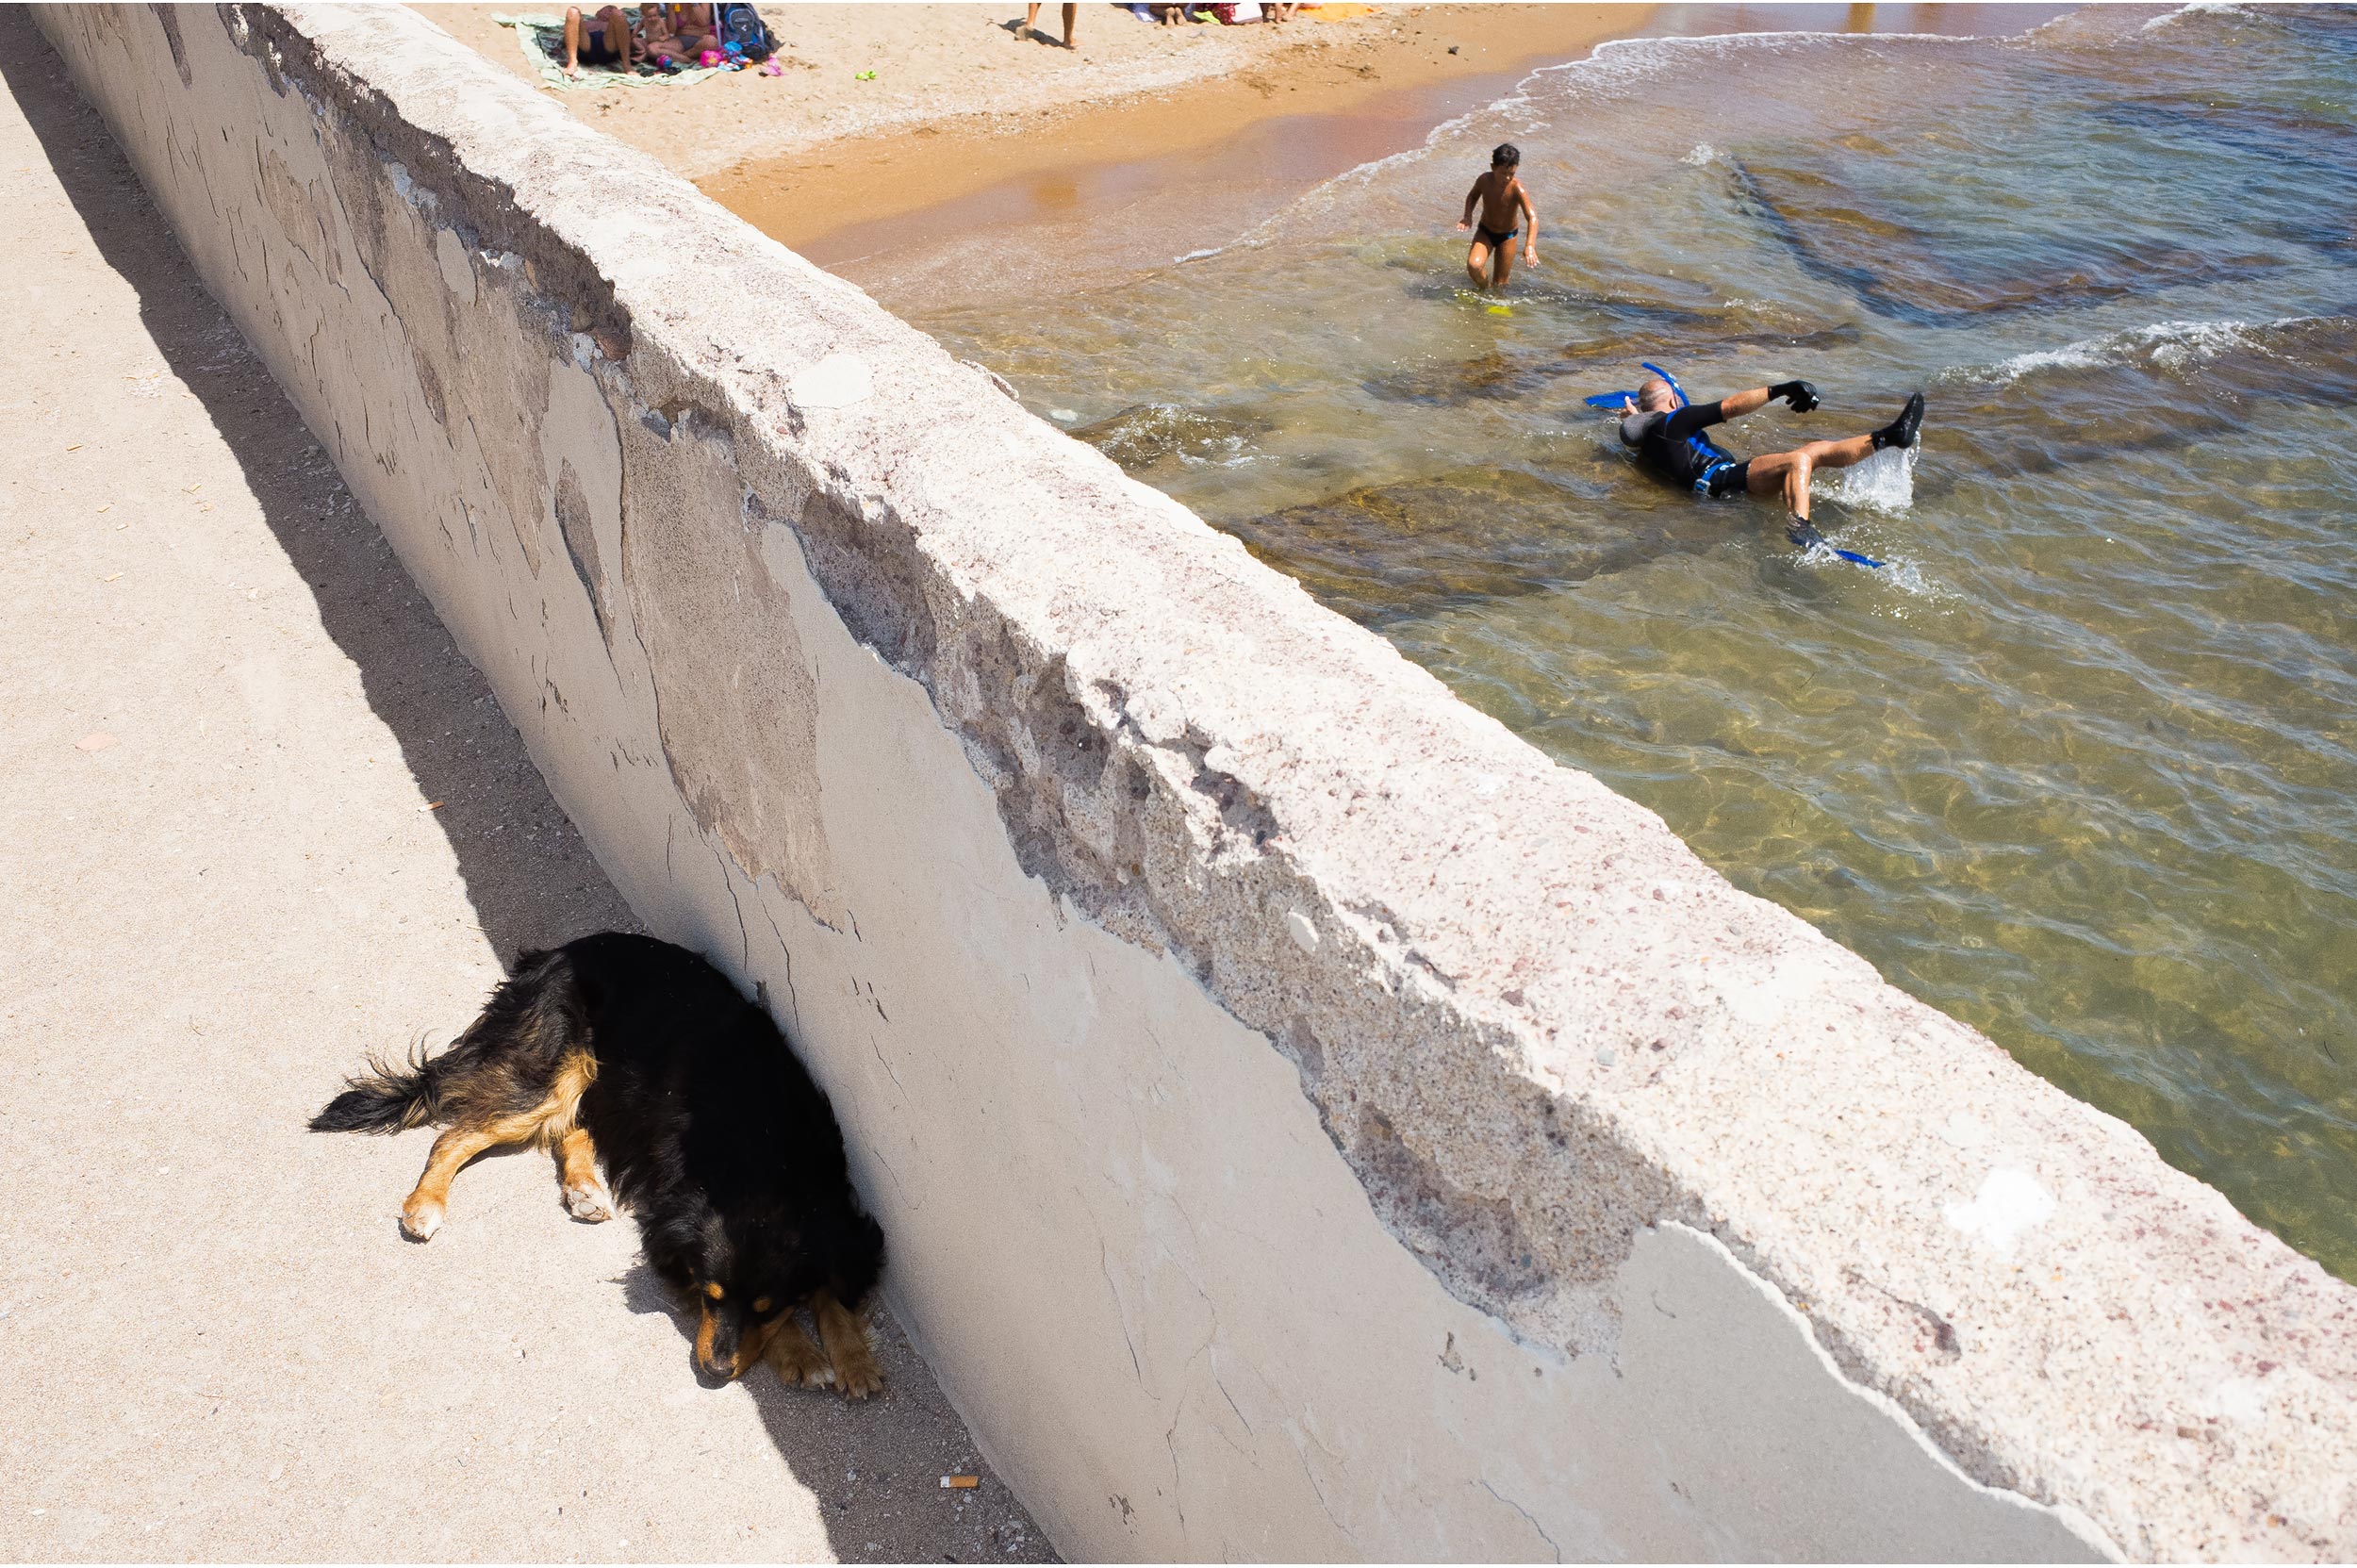 A dog sleeps seeking the shadow in Summer, while a man struggles trying to have fun in the water.